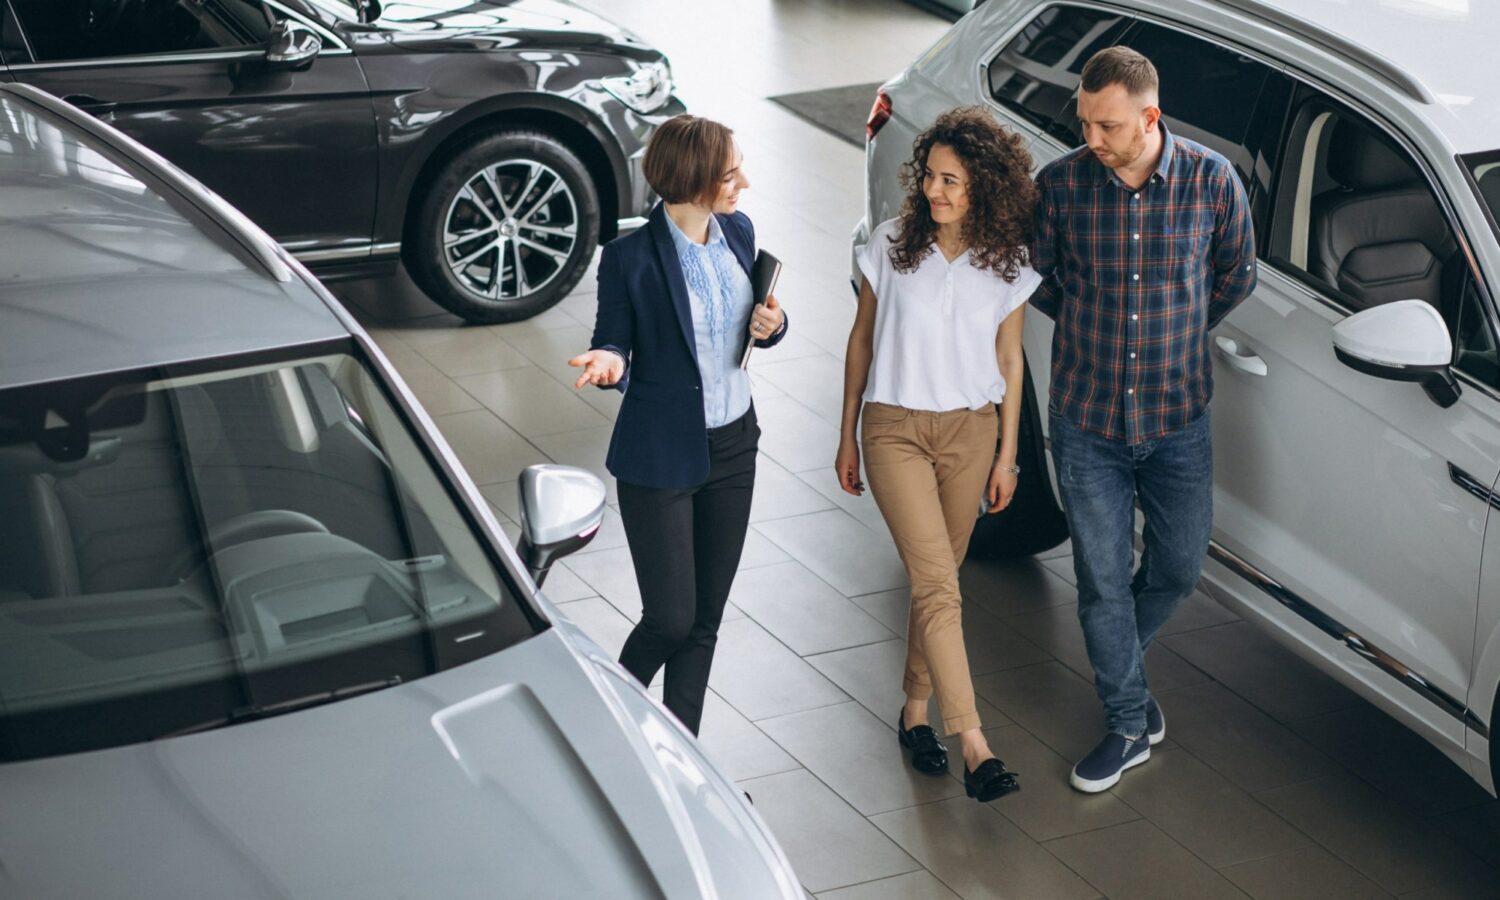 By showcasing your EV knowledge, you can help electric car buyers have a more pleasant and effective experience on your sales floor.